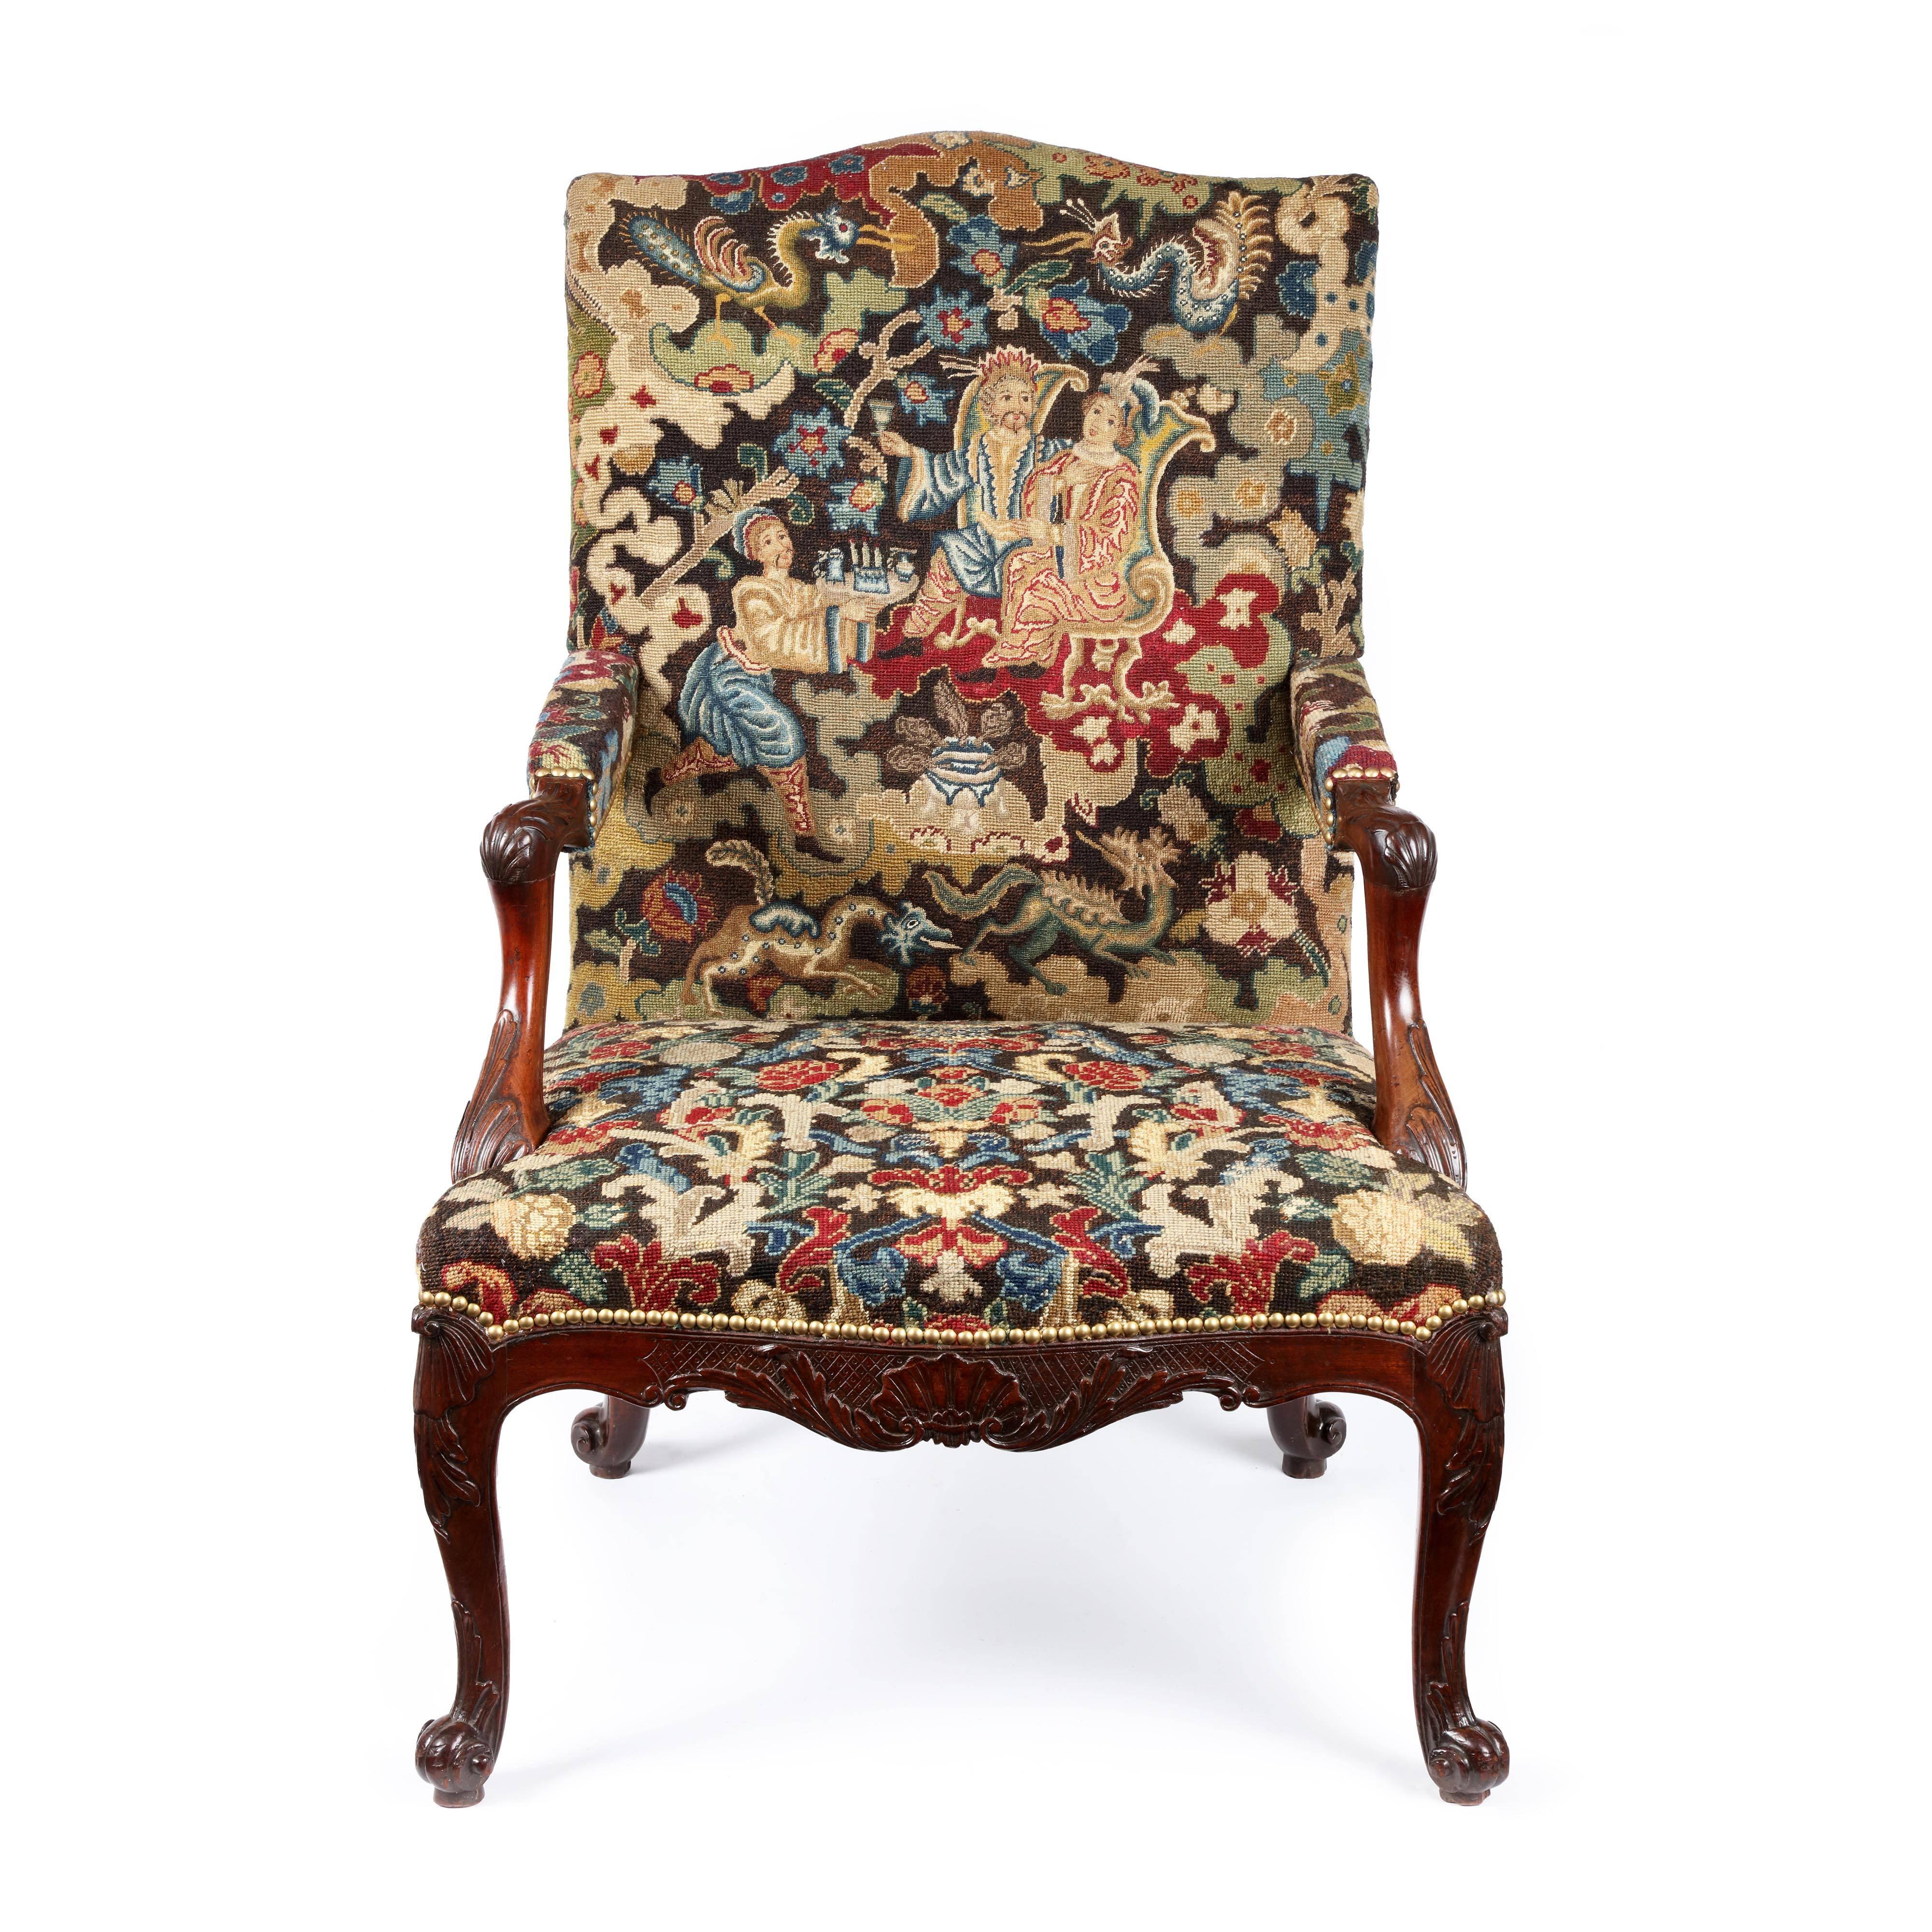 A fine George II carved mahogany Gainsborough chair upholstered in a period 18th century needlework. The upholstered needlework back of serpentine form, the arms with carved shell scroll terminals above in-curved moulded supports edged with rope